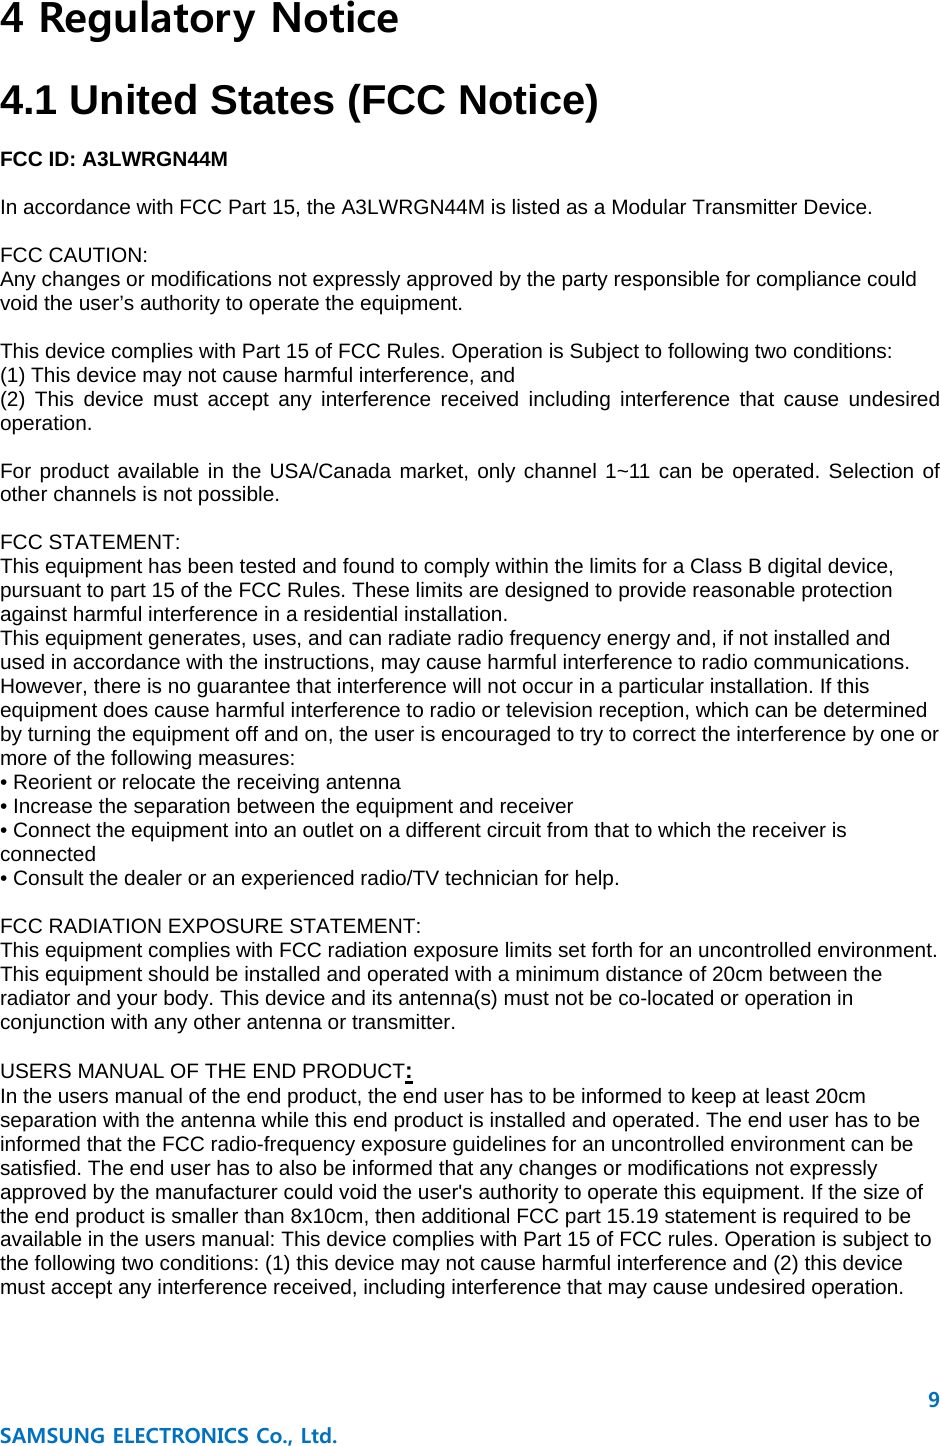 9 SAMSUNG ELECTRONICS Co., Ltd. 4 Regulatory Notice  4.1 United States (FCC Notice)  FCC ID: A3LWRGN44M  In accordance with FCC Part 15, the A3LWRGN44M is listed as a Modular Transmitter Device.  FCC CAUTION: Any changes or modifications not expressly approved by the party responsible for compliance could void the user’s authority to operate the equipment.  This device complies with Part 15 of FCC Rules. Operation is Subject to following two conditions: (1) This device may not cause harmful interference, and (2) This device must accept any interference received including interference that cause undesired operation.  For product available in the USA/Canada market, only channel 1~11 can be operated. Selection of other channels is not possible.  FCC STATEMENT: This equipment has been tested and found to comply within the limits for a Class B digital device, pursuant to part 15 of the FCC Rules. These limits are designed to provide reasonable protection against harmful interference in a residential installation. This equipment generates, uses, and can radiate radio frequency energy and, if not installed and used in accordance with the instructions, may cause harmful interference to radio communications. However, there is no guarantee that interference will not occur in a particular installation. If this equipment does cause harmful interference to radio or television reception, which can be determined by turning the equipment off and on, the user is encouraged to try to correct the interference by one or more of the following measures: • Reorient or relocate the receiving antenna • Increase the separation between the equipment and receiver • Connect the equipment into an outlet on a different circuit from that to which the receiver is connected • Consult the dealer or an experienced radio/TV technician for help.  FCC RADIATION EXPOSURE STATEMENT: This equipment complies with FCC radiation exposure limits set forth for an uncontrolled environment. This equipment should be installed and operated with a minimum distance of 20cm between the radiator and your body. This device and its antenna(s) must not be co-located or operation in conjunction with any other antenna or transmitter.  USERS MANUAL OF THE END PRODUCT: In the users manual of the end product, the end user has to be informed to keep at least 20cm separation with the antenna while this end product is installed and operated. The end user has to be informed that the FCC radio-frequency exposure guidelines for an uncontrolled environment can be satisfied. The end user has to also be informed that any changes or modifications not expressly approved by the manufacturer could void the user&apos;s authority to operate this equipment. If the size of the end product is smaller than 8x10cm, then additional FCC part 15.19 statement is required to be available in the users manual: This device complies with Part 15 of FCC rules. Operation is subject to the following two conditions: (1) this device may not cause harmful interference and (2) this device must accept any interference received, including interference that may cause undesired operation.    